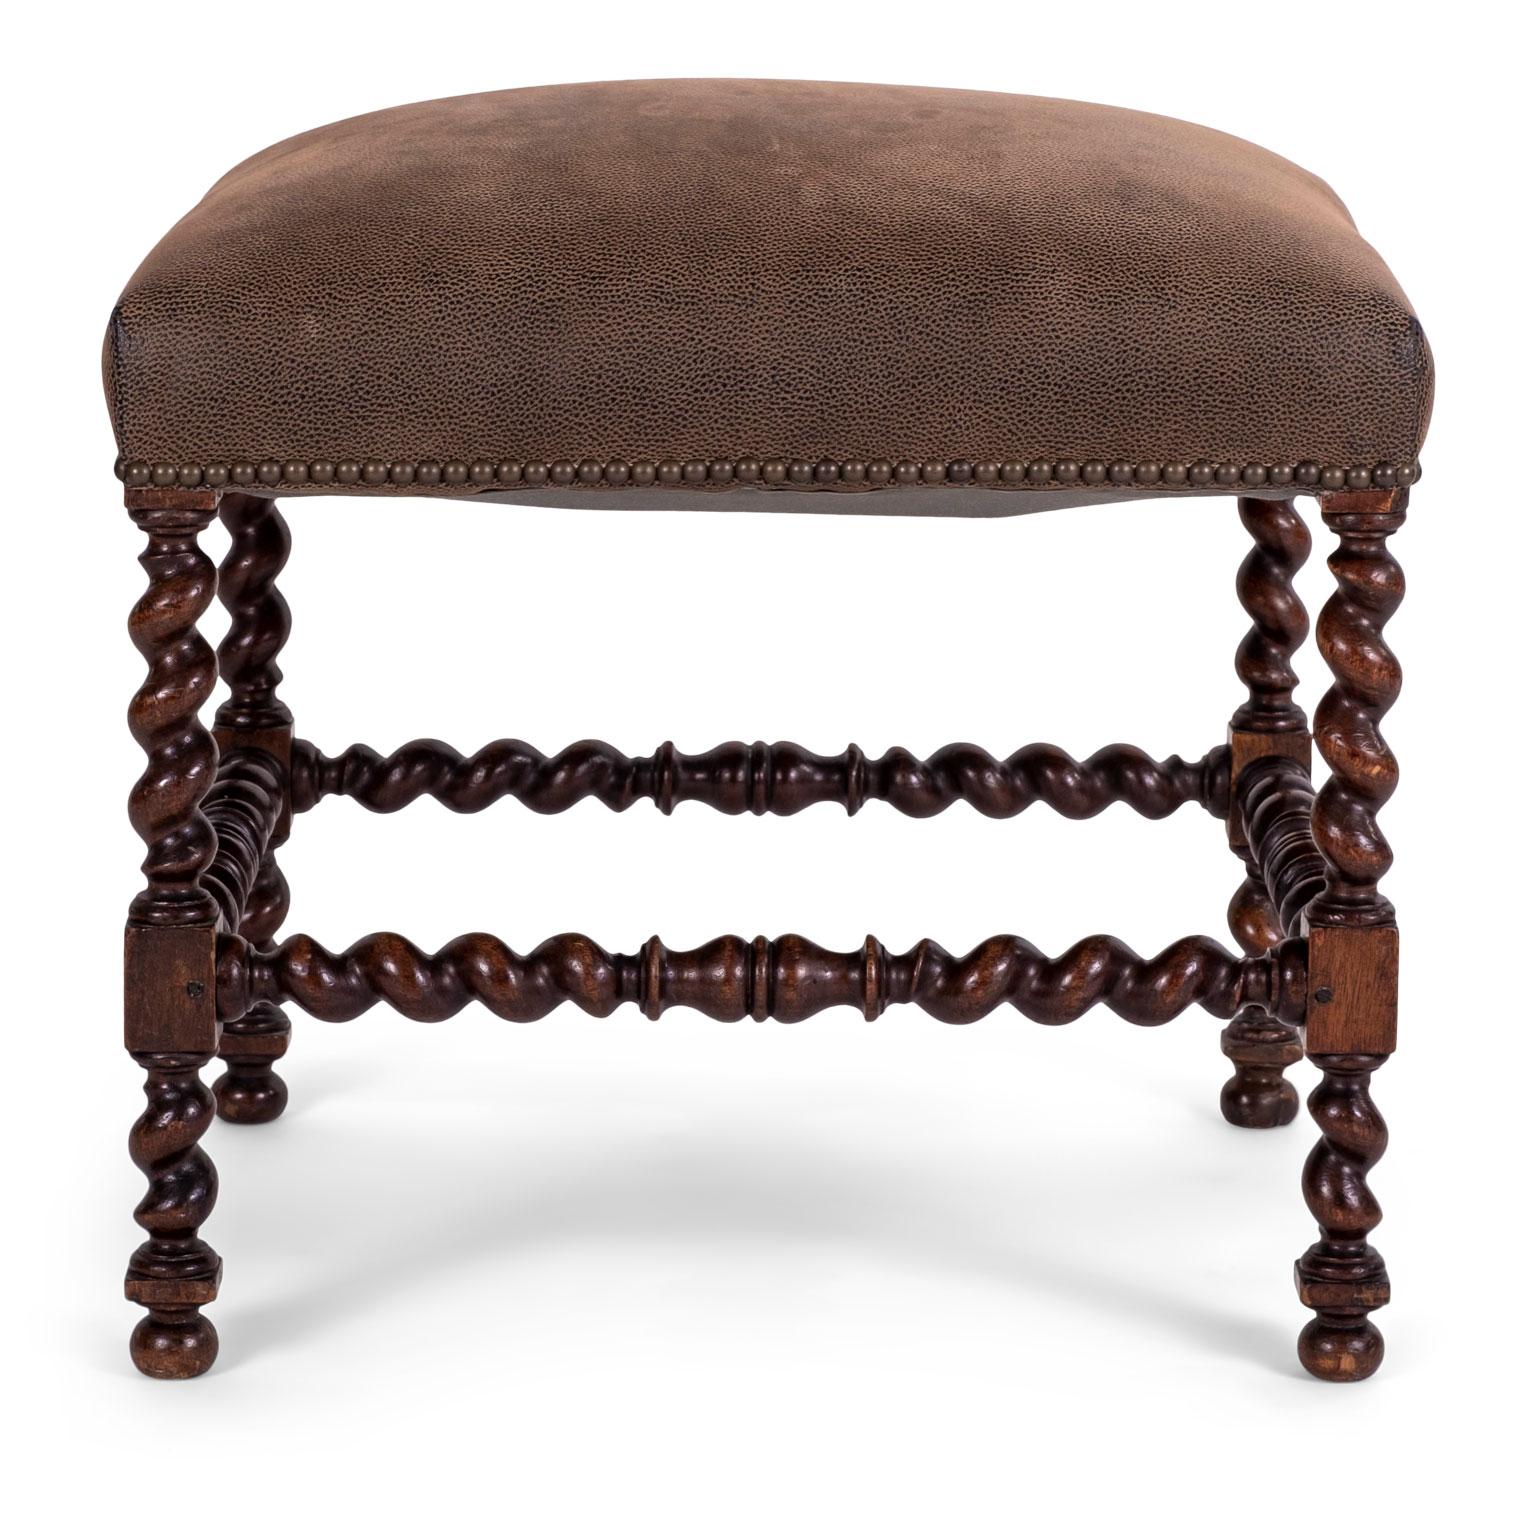 19th Century Leather-Covered Louis XIII Walnut Stool